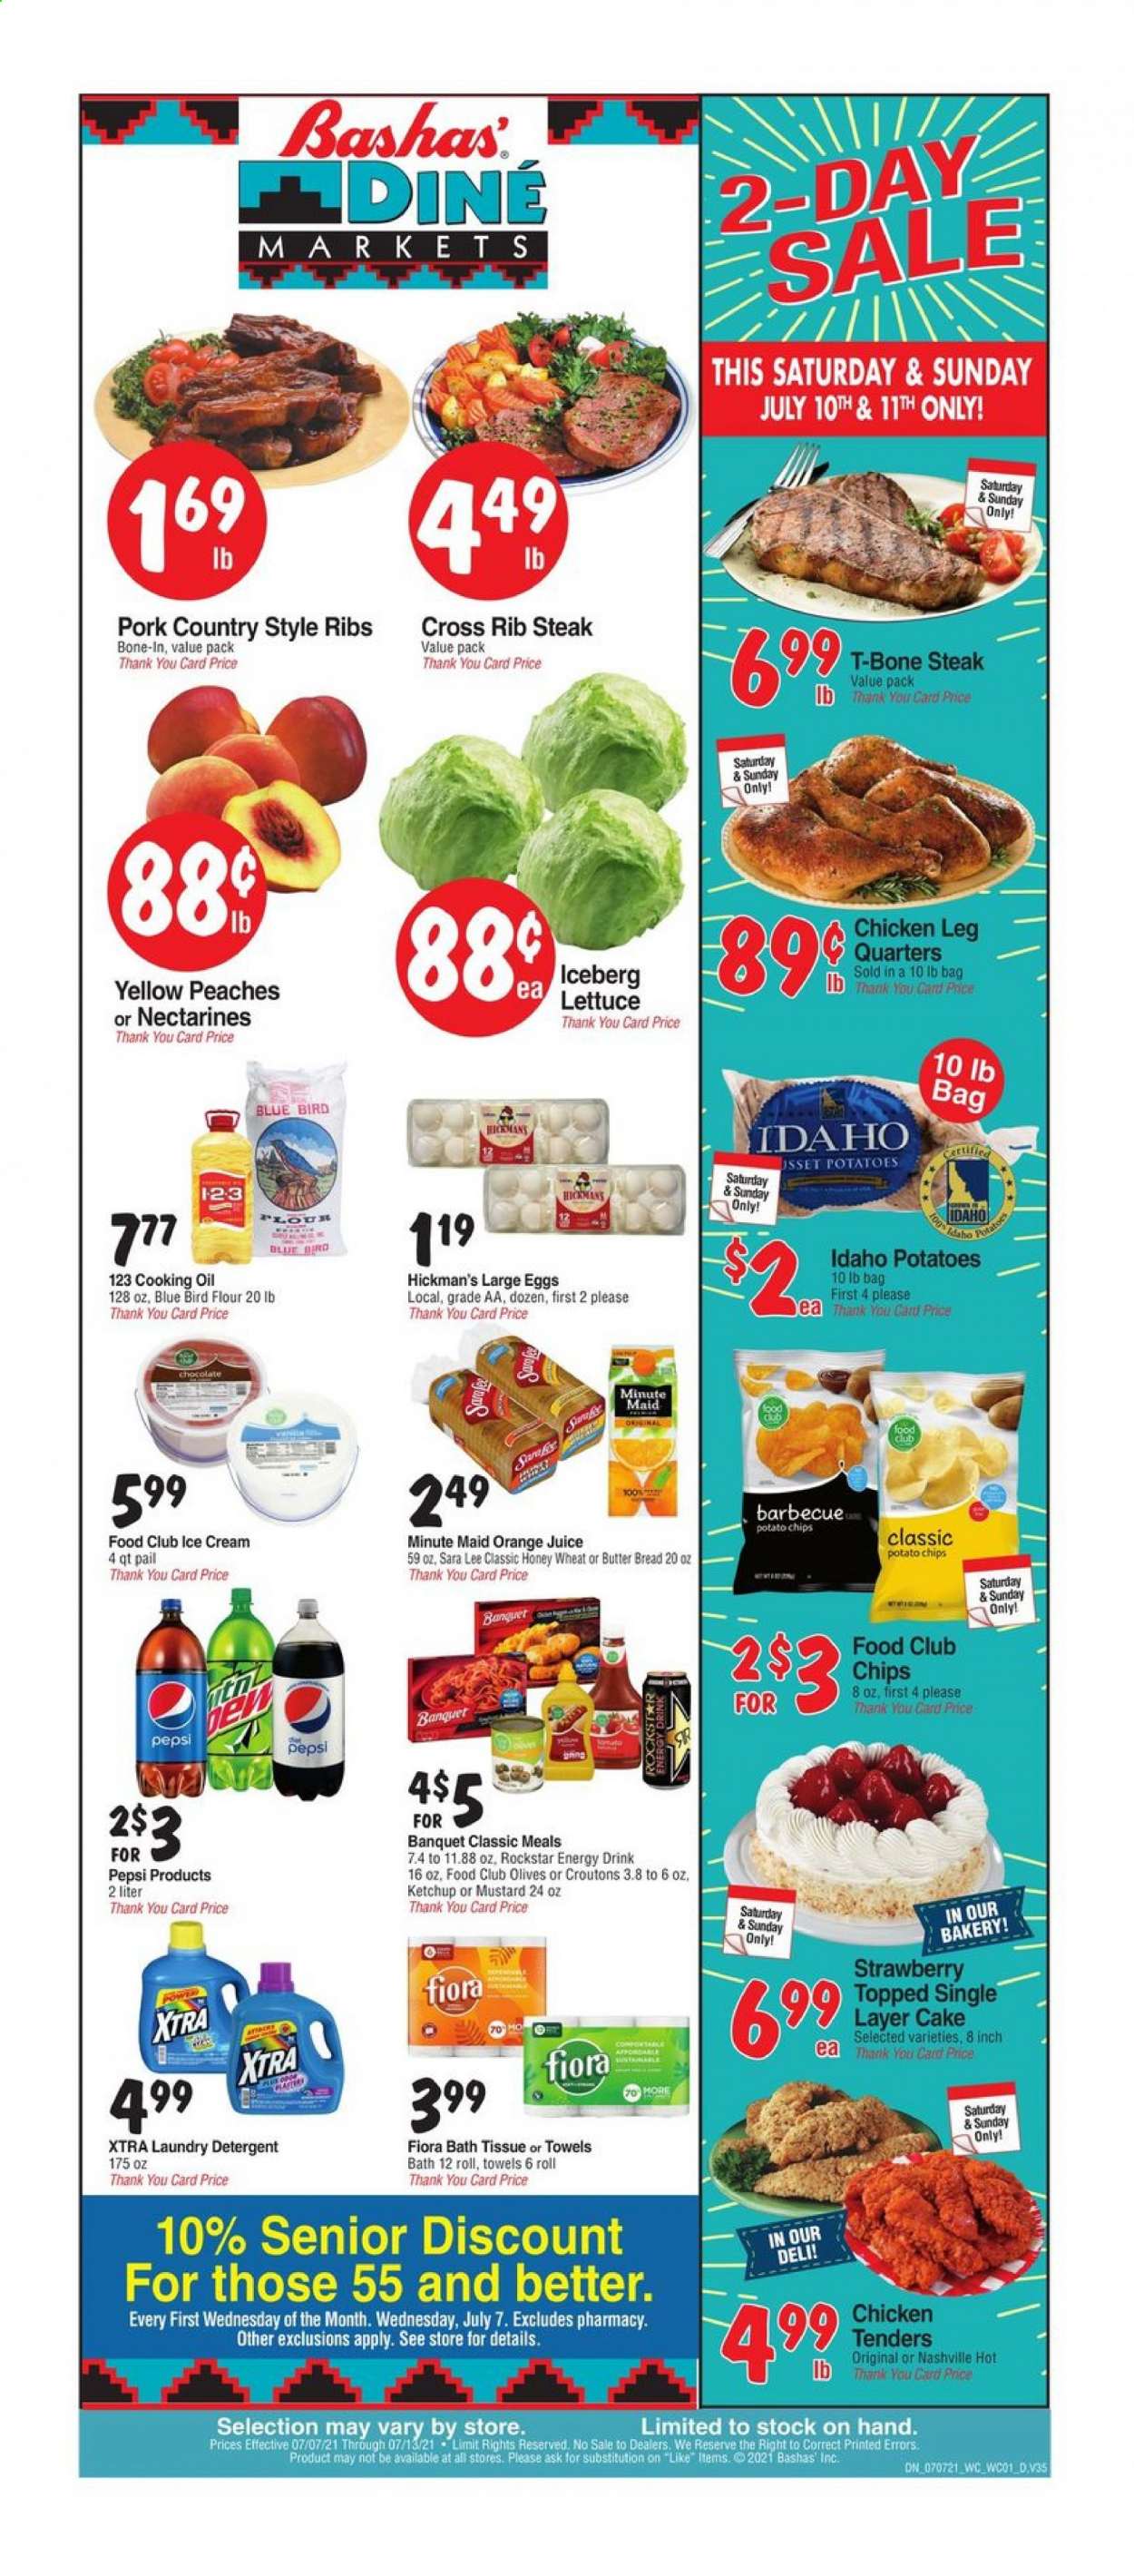 thumbnail - Bashas' Diné Markets Flyer - 07/07/2021 - 07/13/2021 - Sales products - bread, Sara Lee, lettuce, large eggs, ice cream, potato chips, chips, croutons, flour, olives, mustard, ketchup, oil, Pepsi, orange juice, juice, energy drink, Rockstar, fruit punch, chicken legs, chicken tenders, beef meat, t-bone steak, steak, pork ribs, country style ribs, bath tissue, detergent, laundry detergent, XTRA, nectarines, peaches. Page 1.